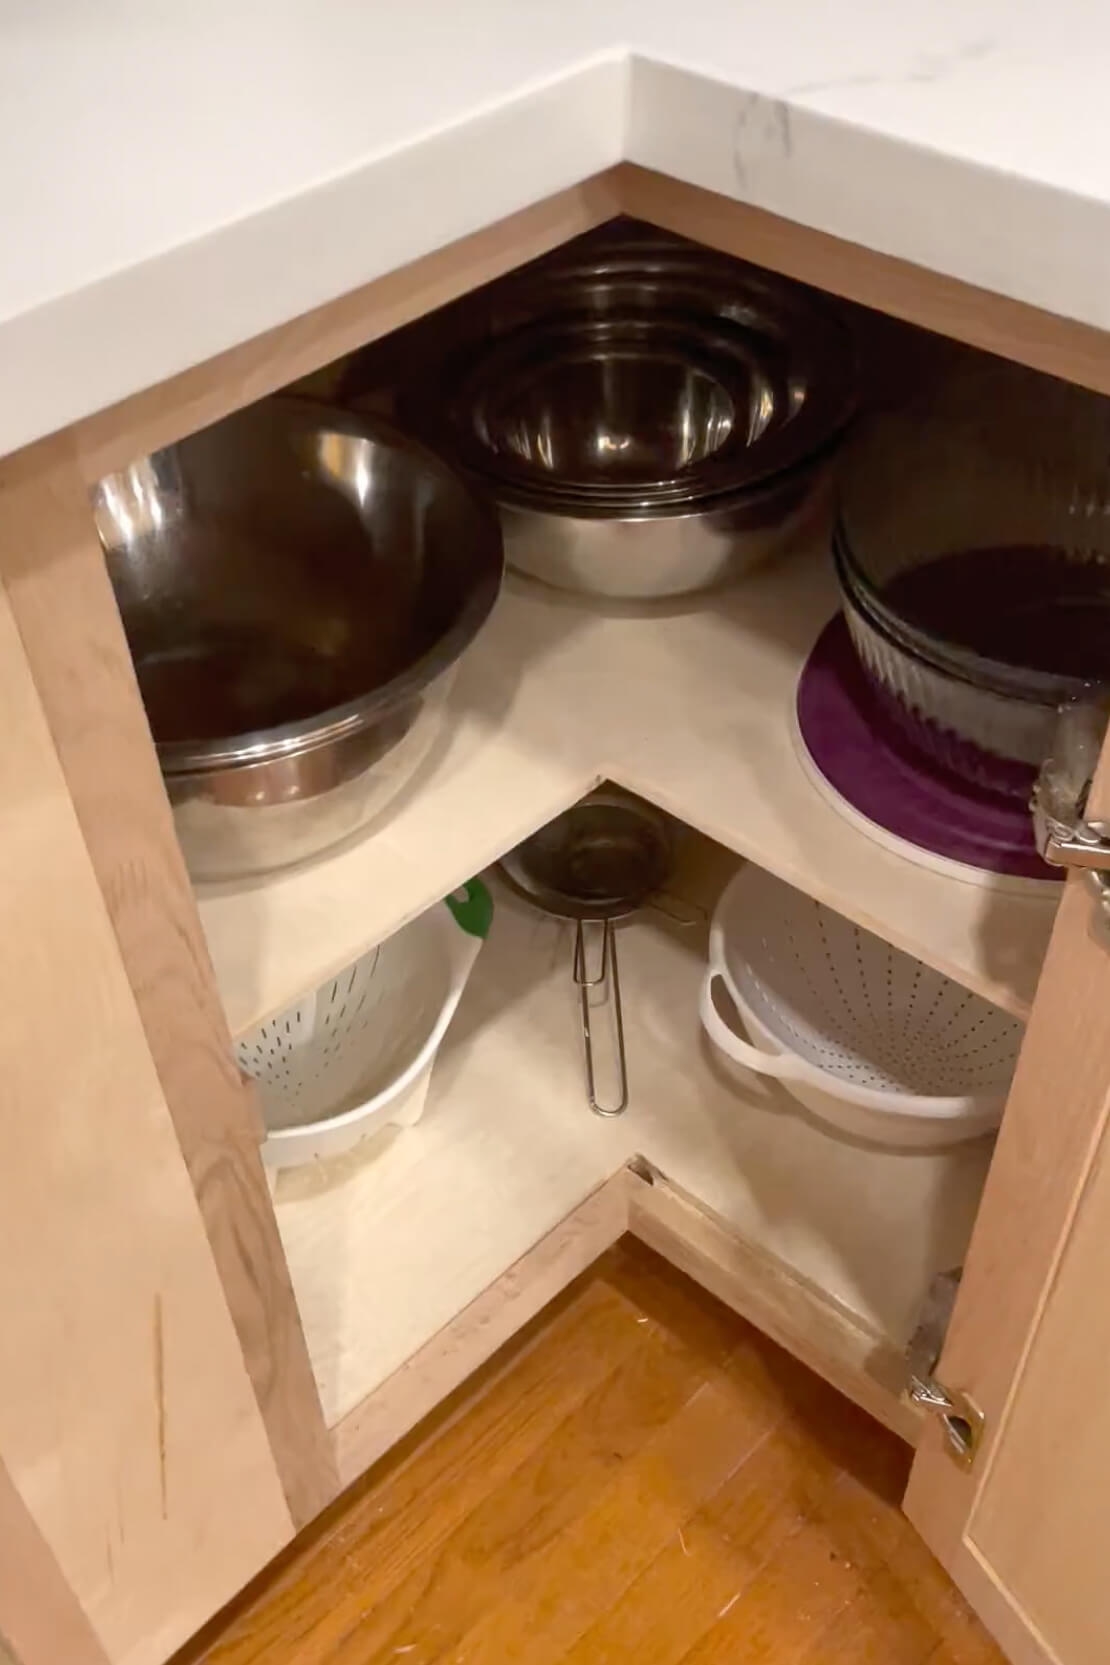 Full shelves on a kitchen cabinet after removing a lazy susan.